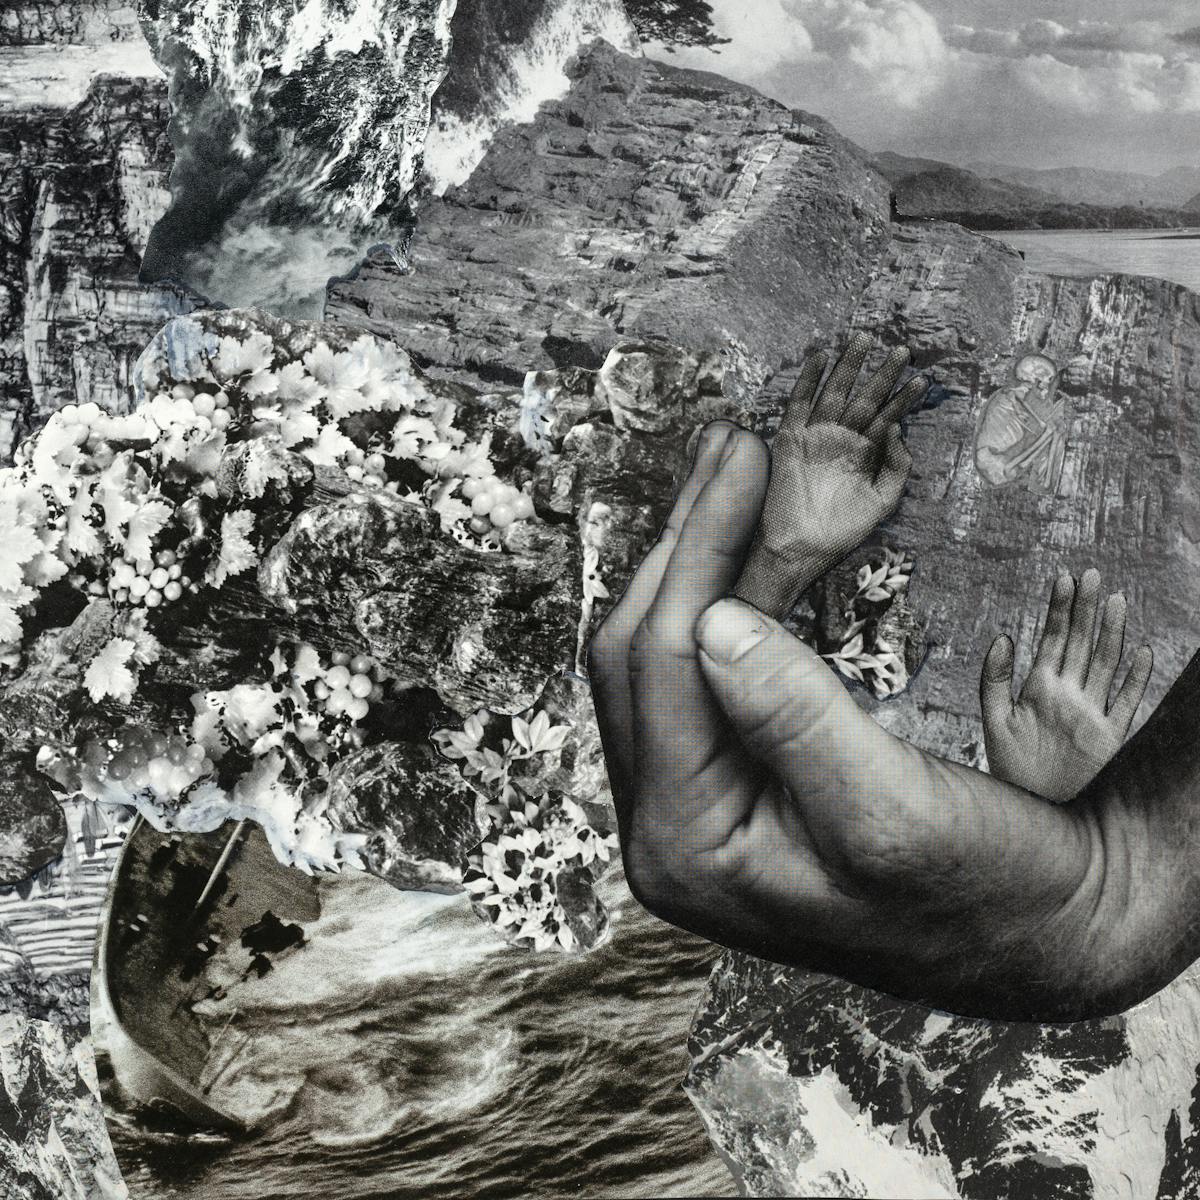 Photographic collage using images cut out from magazines and books. The scene depicts a complex and confusing image. To the left side, a sea of arms making fists all stick out horizontally. To the left side a large hand enters the image cradling two more hands which are held out as if asking for help. Behind these hands, against a cliff face a small skeleton can be seen in the foetal position. The centre of the frame contains fragments of fruit, rock faces, foliage and the bow of a ship ploughing through water. The overall tones of the collage are monotone, blacks, whites and greys.